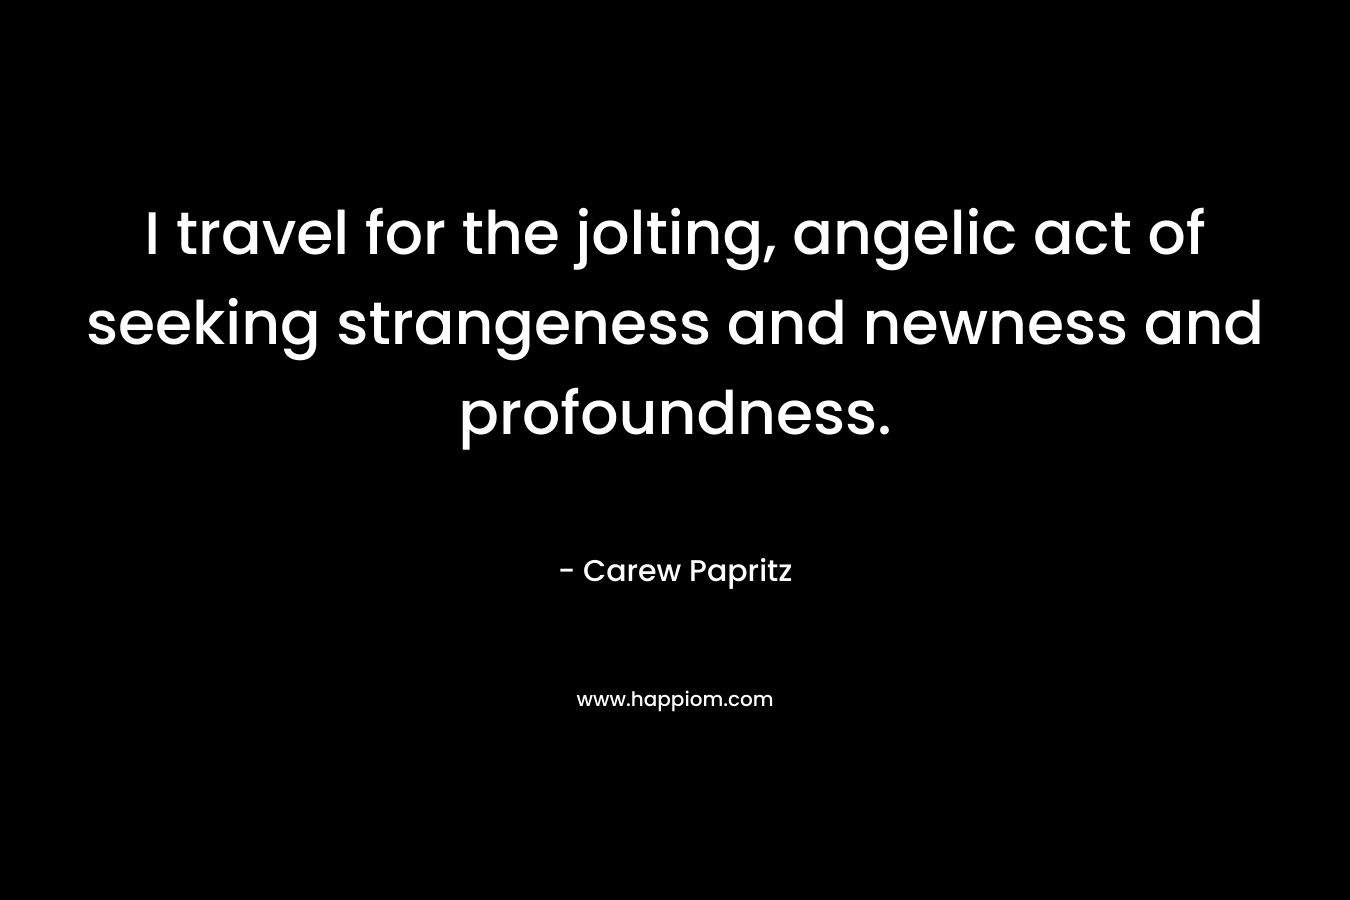 I travel for the jolting, angelic act of seeking strangeness and newness and profoundness. – Carew Papritz